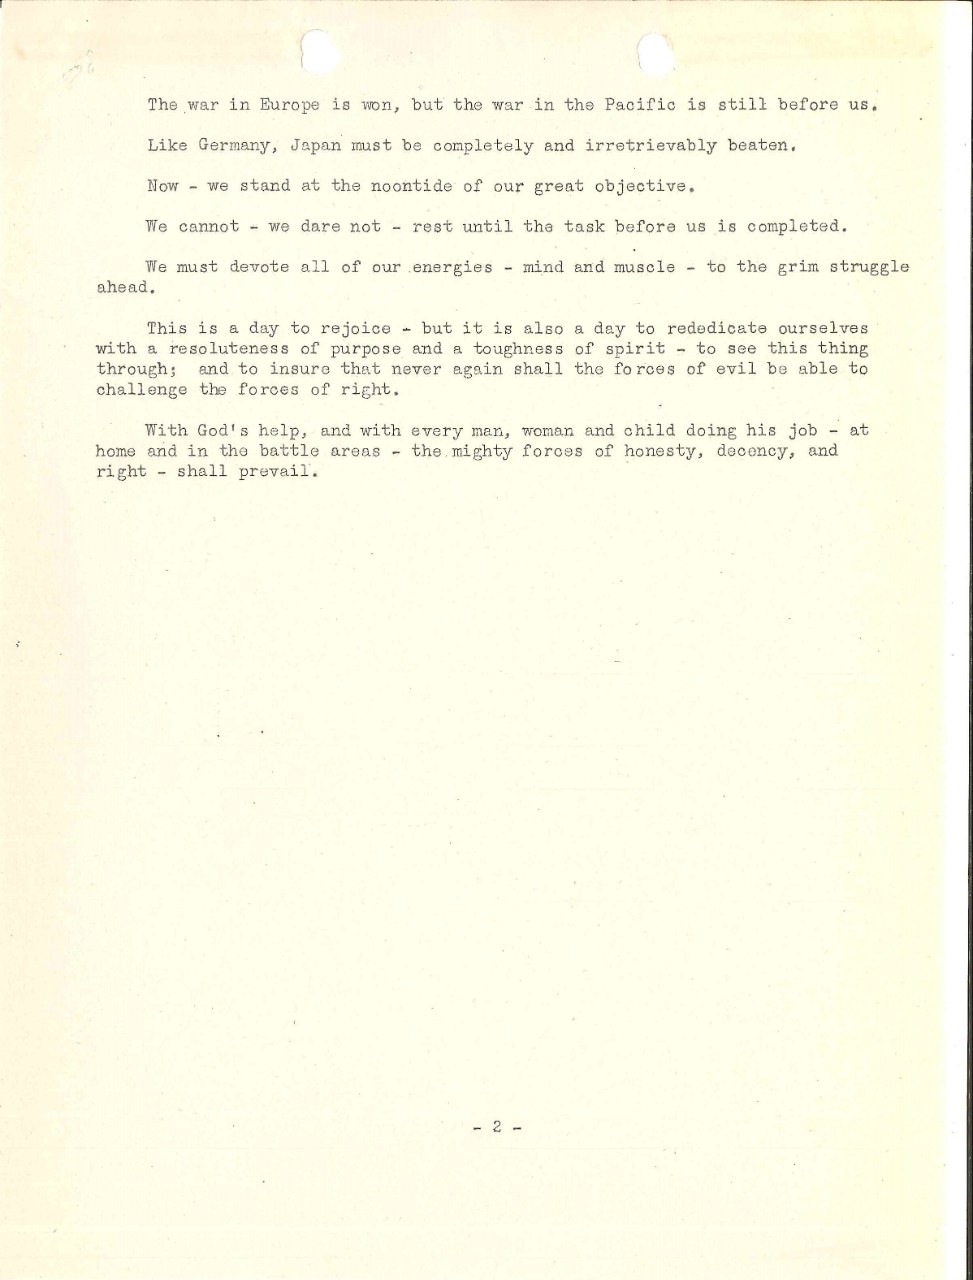 VE Day radio broadcast by Admiral Harold Stark, April 18, 1945, page 2